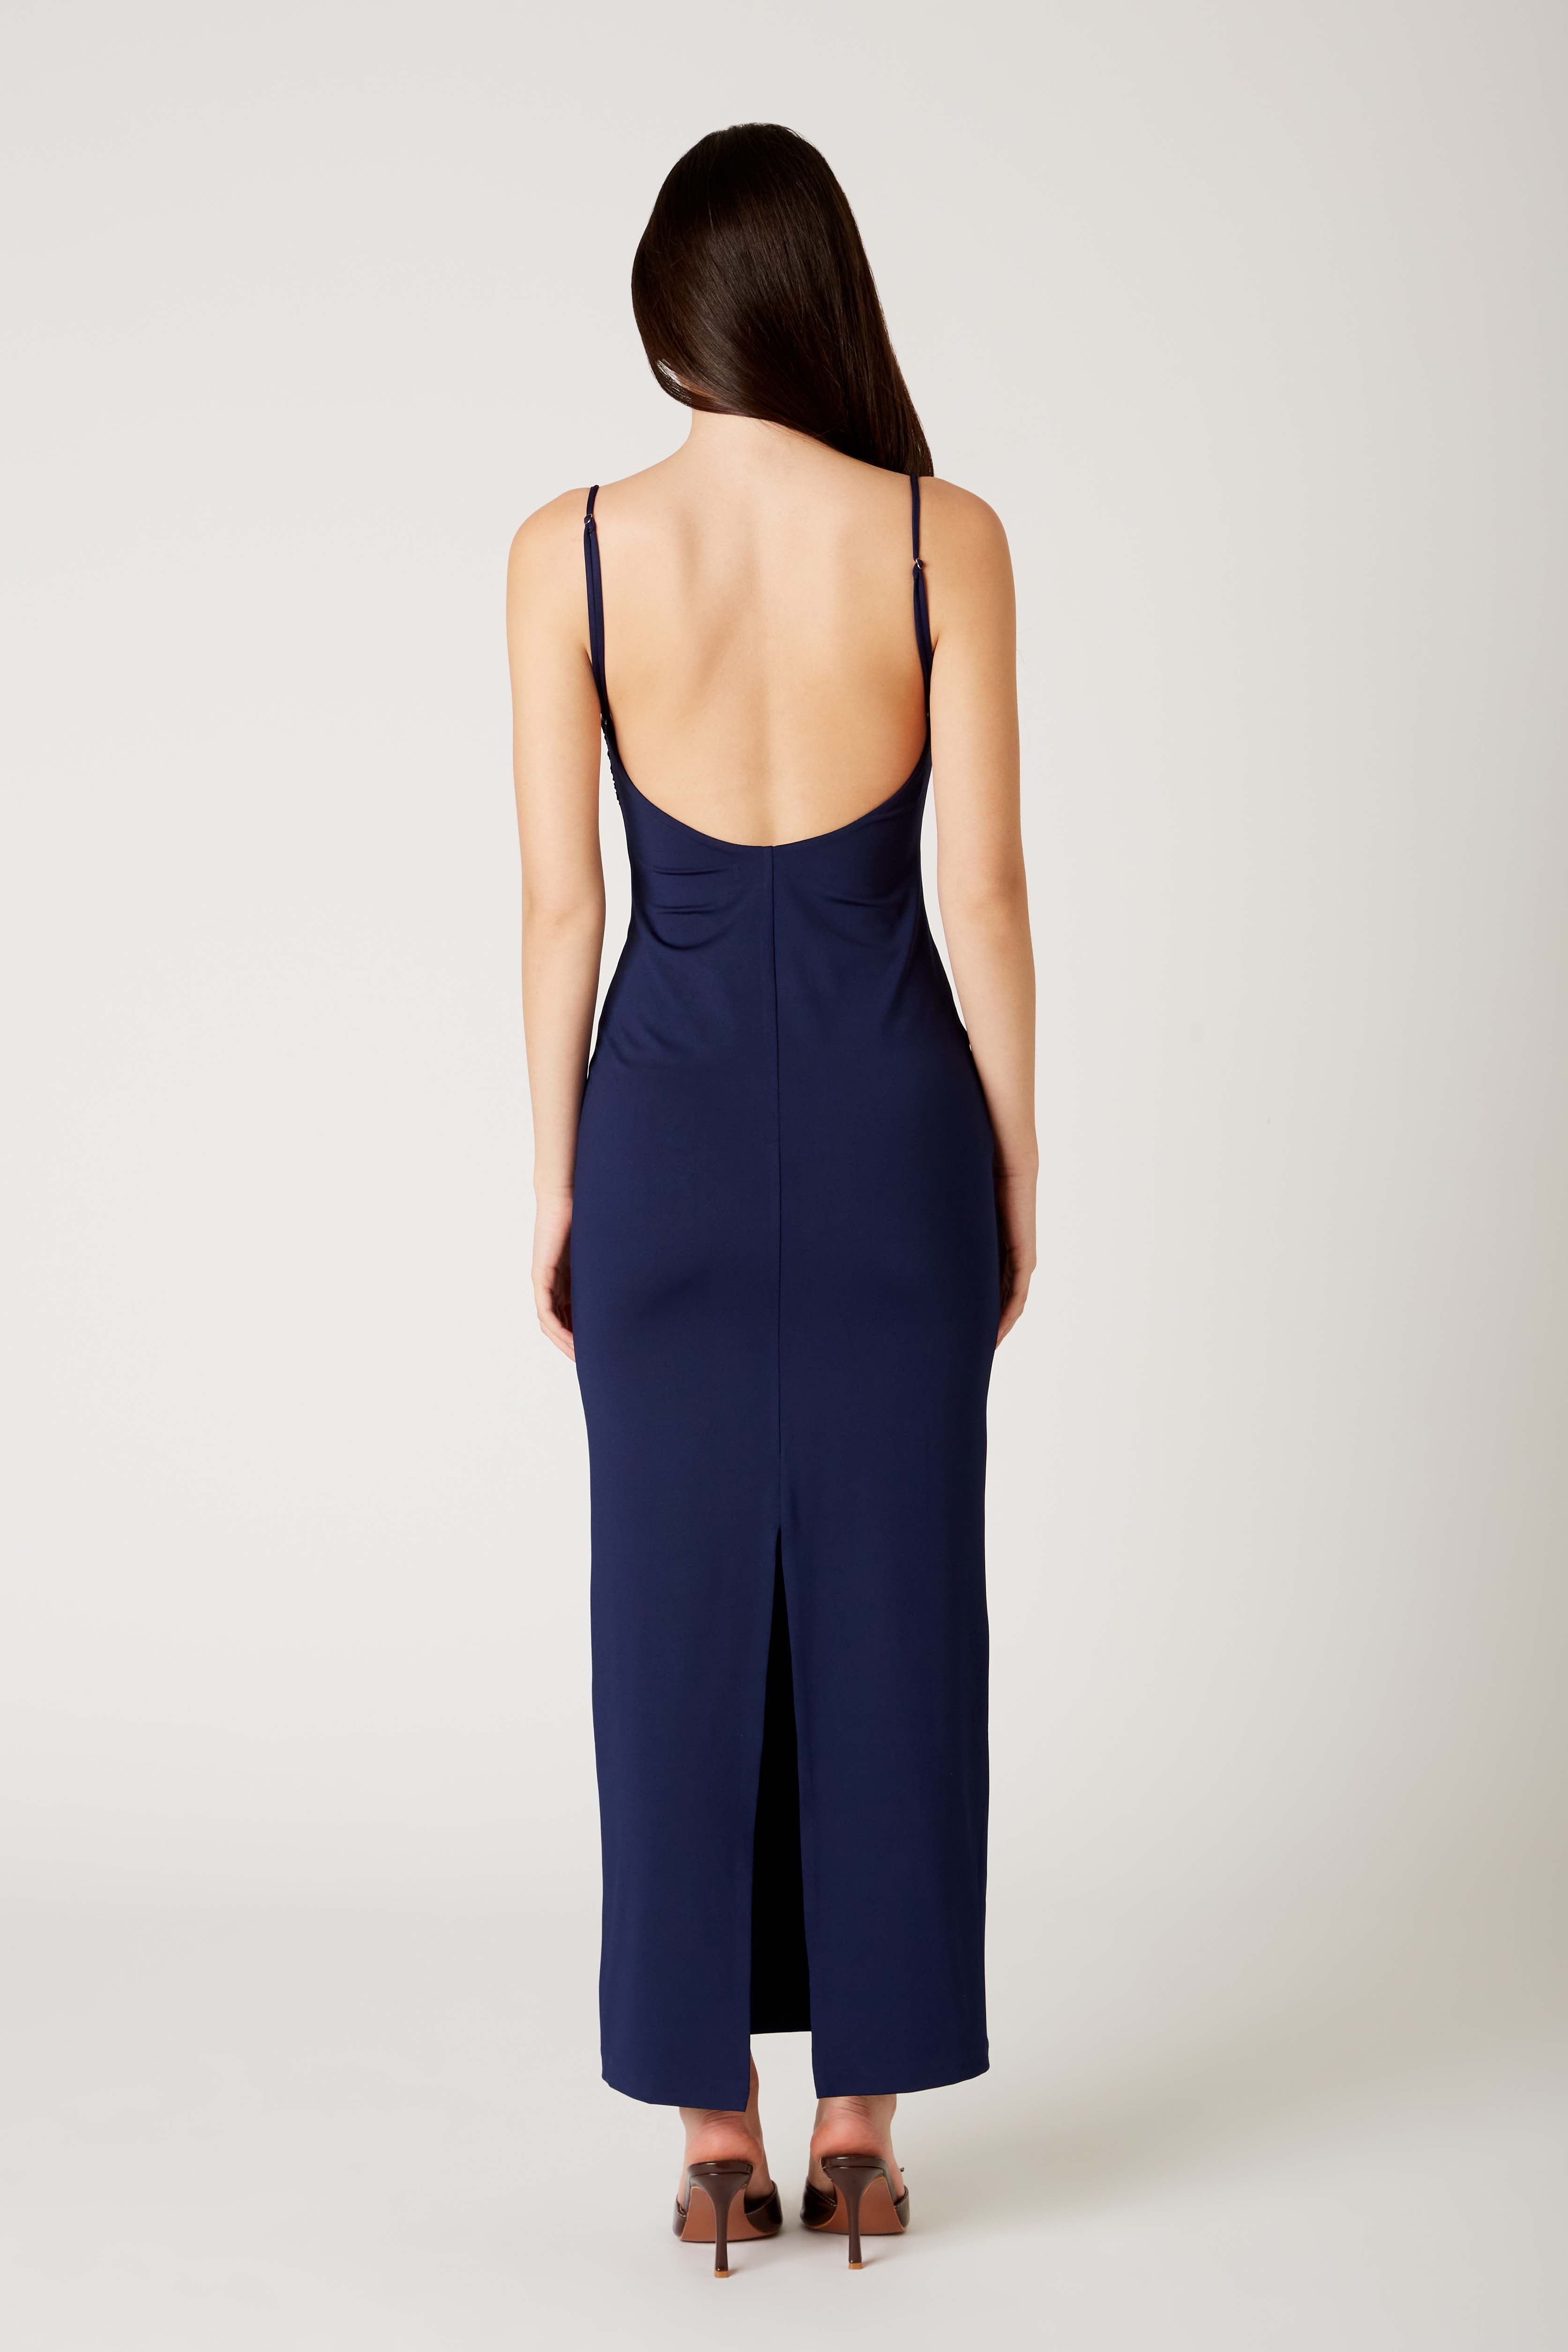 Knit Maxi Dress in navy back view